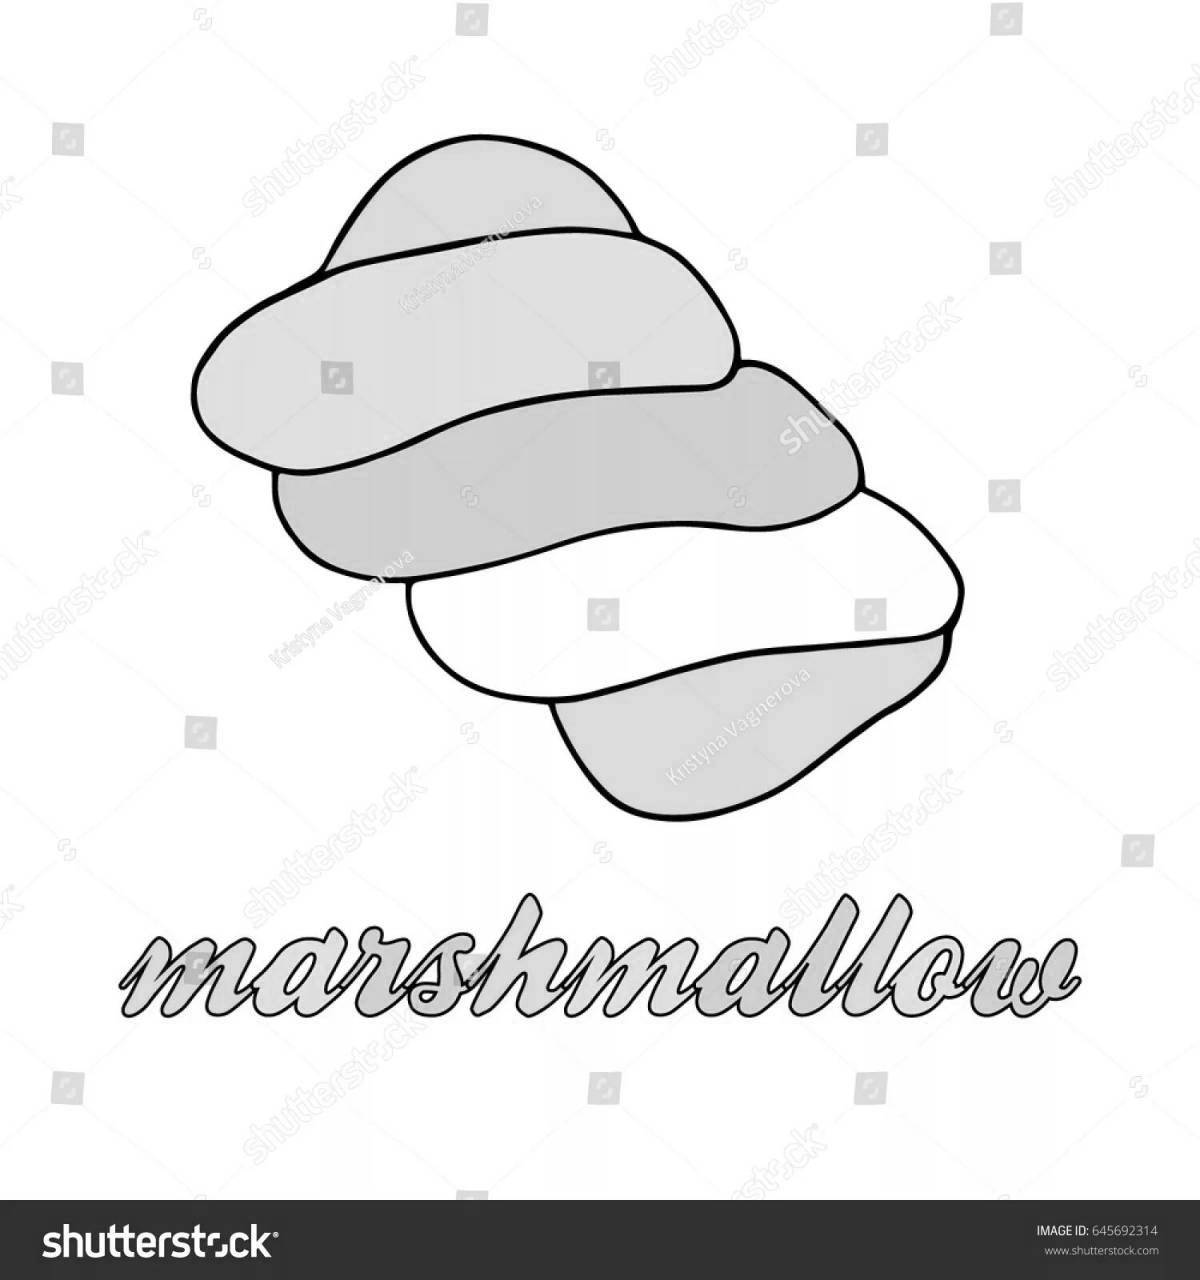 Glowing marshmallow coloring page